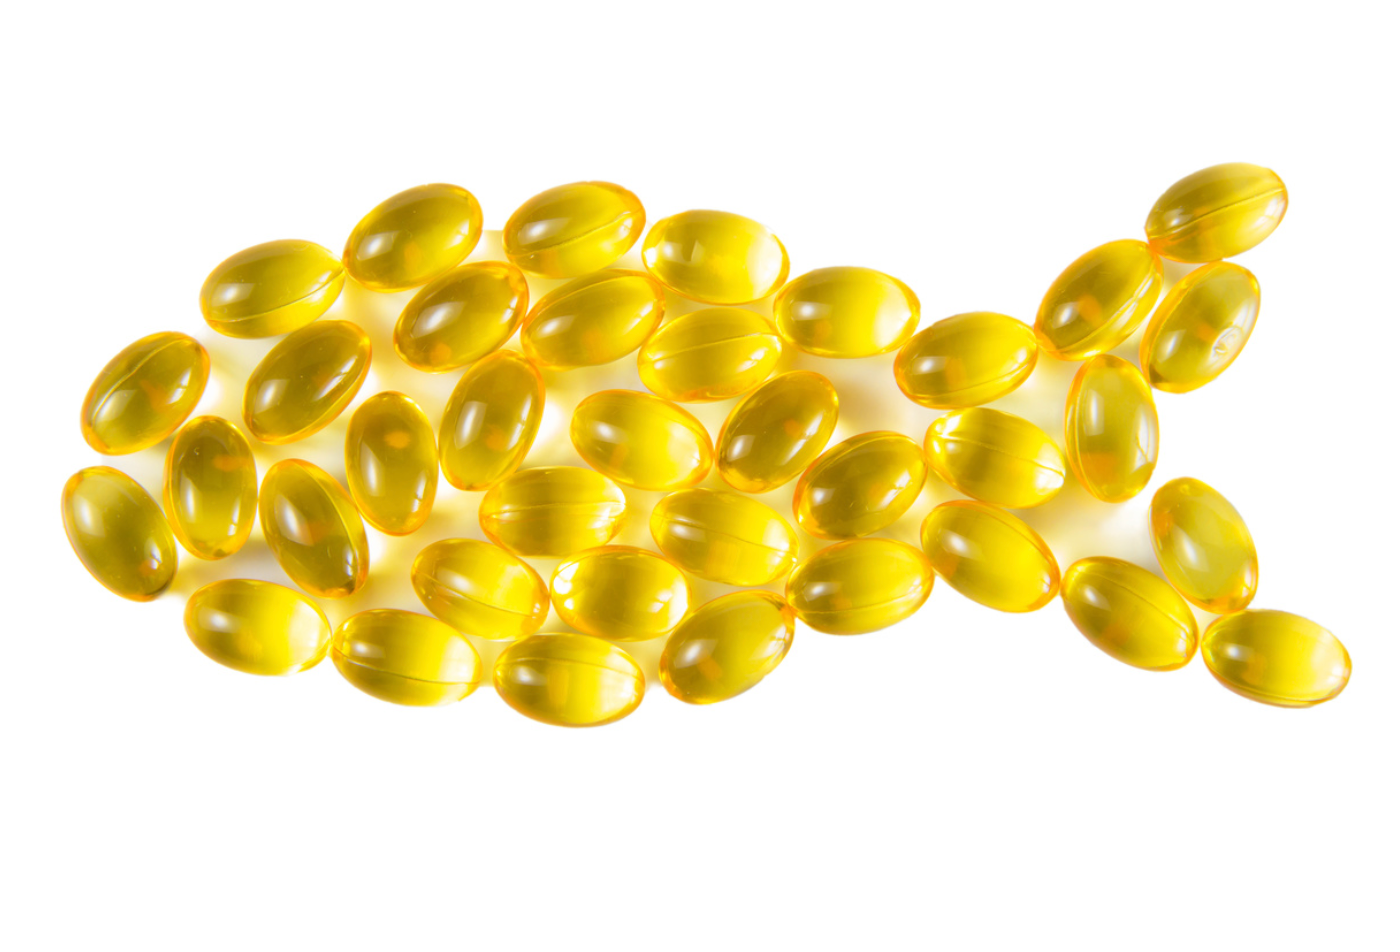 Something Smells Fishy: A Review of Omega-3 and the REDUCE-IT Results Controversy